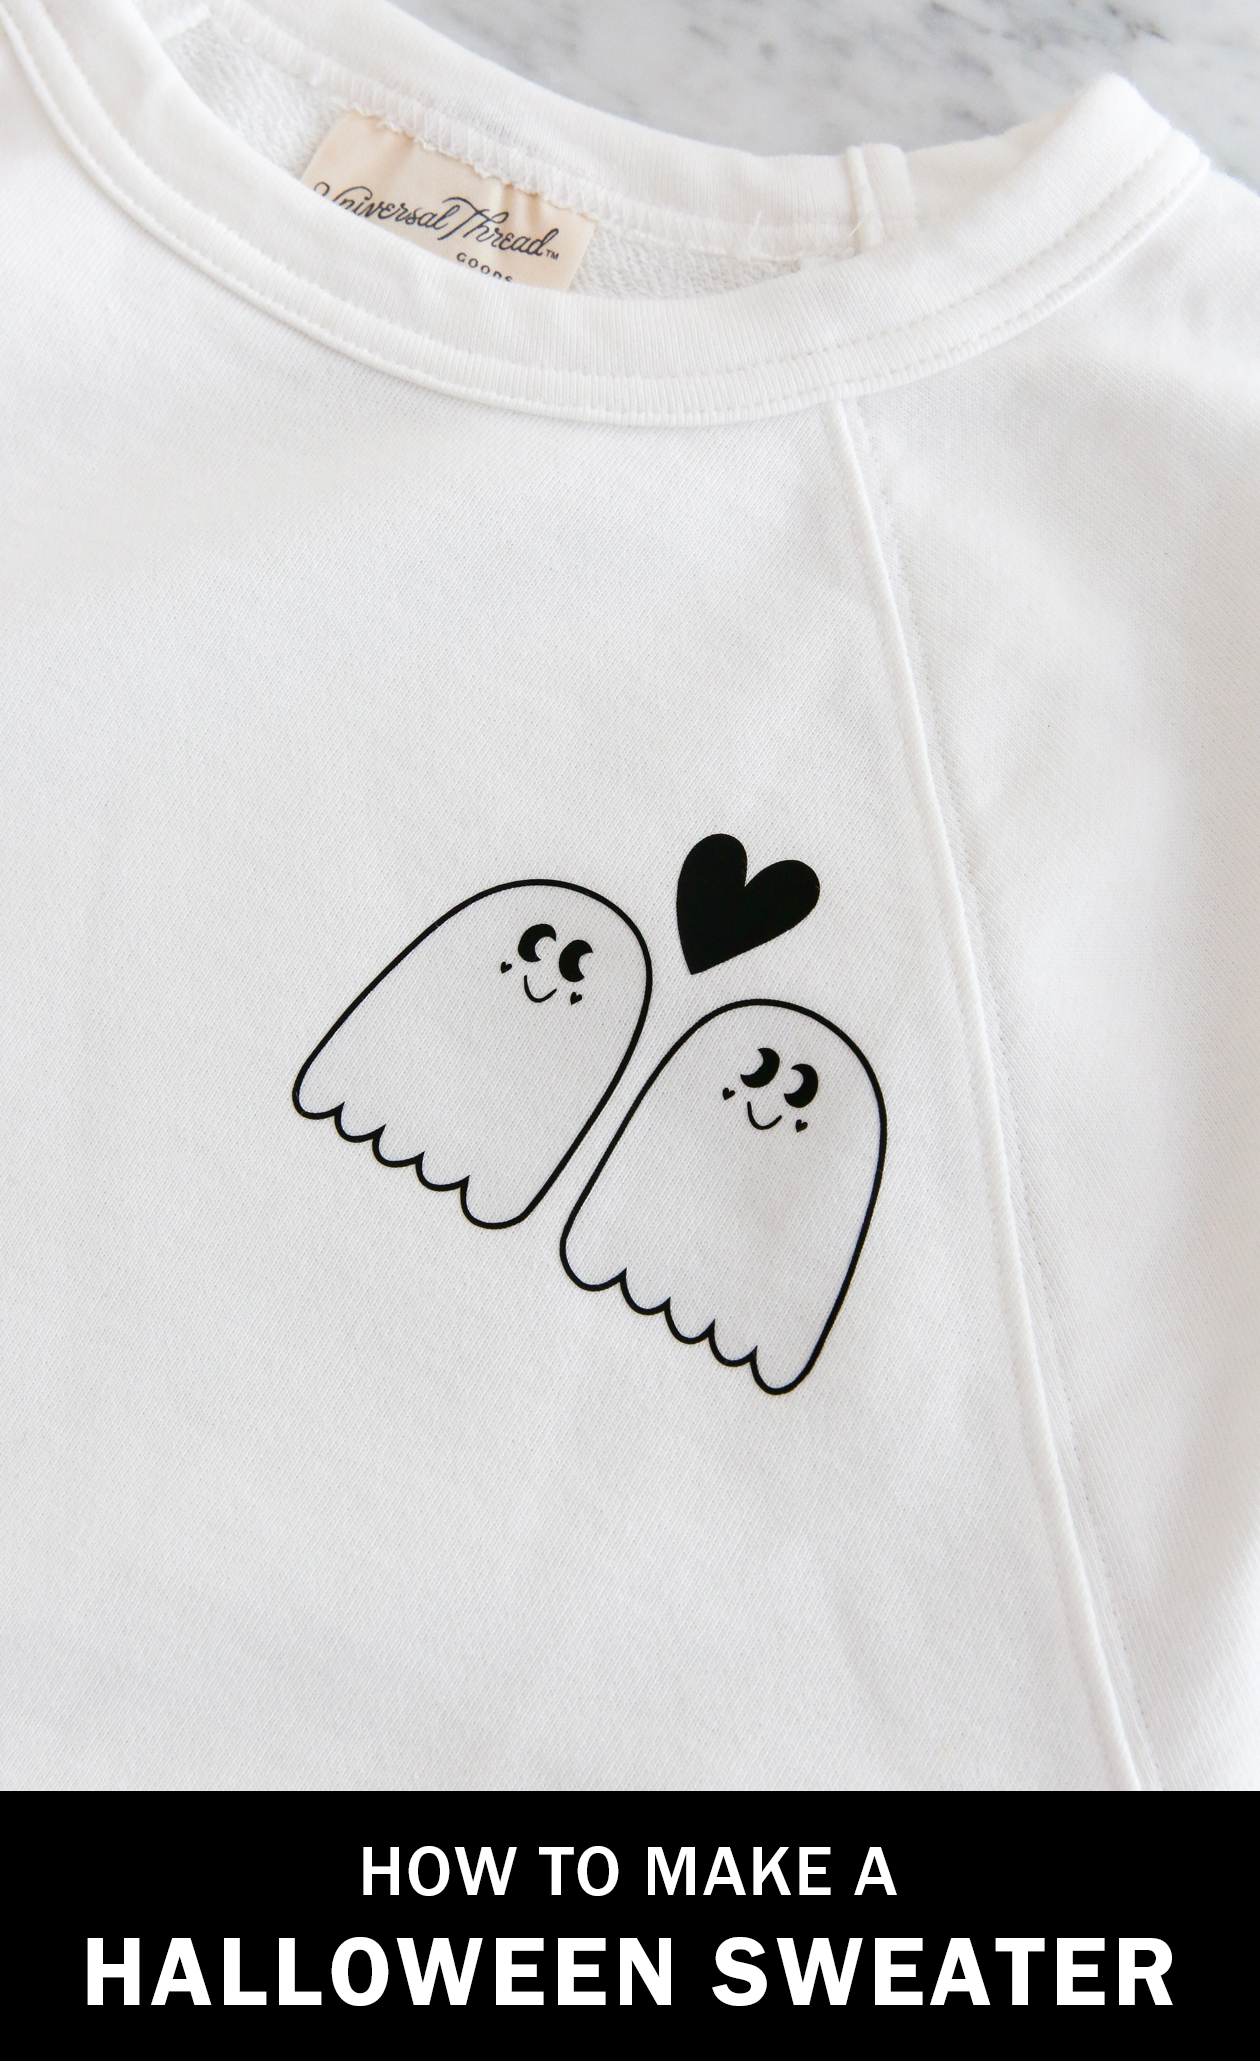 How to Make a Halloween Sweater with a cute ghost iron on vinyl decal!